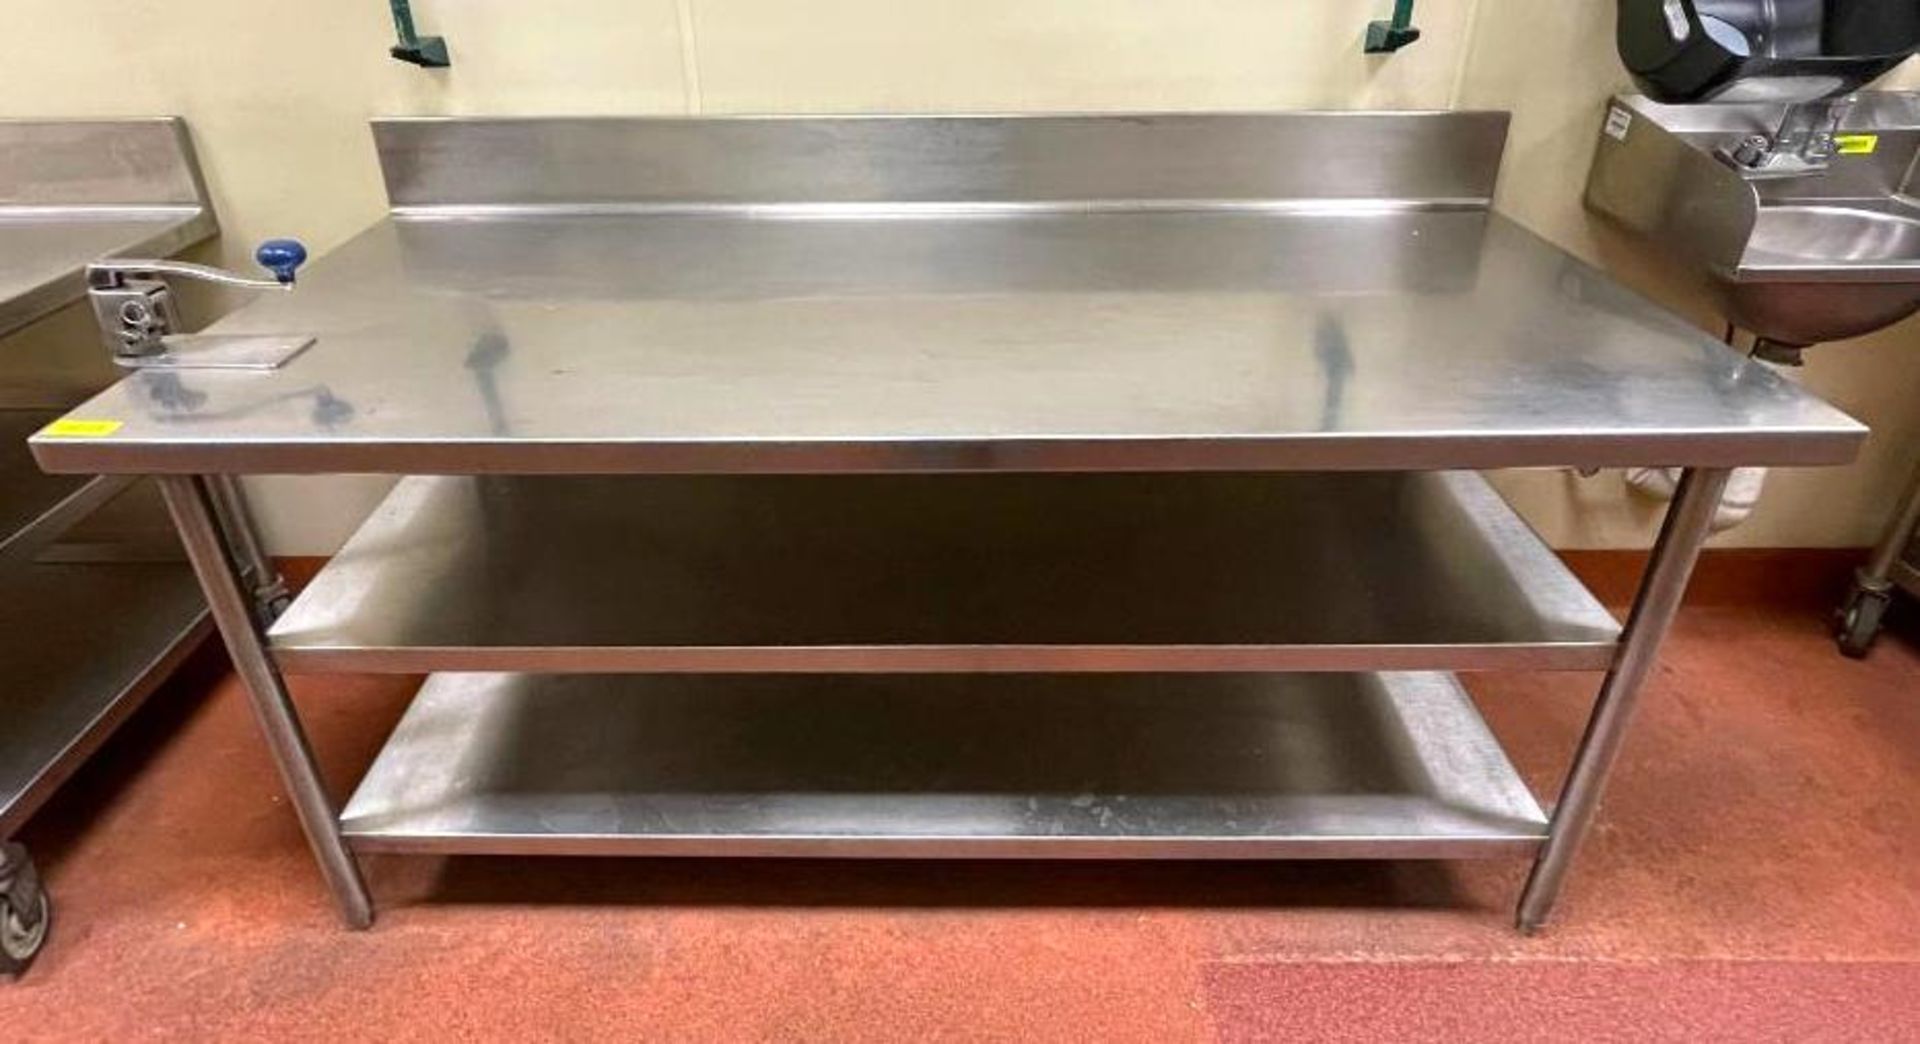 DESCRIPTION 6' STAINLESS TABLE WITH BACKSPLASH AND UNDERSTORAGE ON CASTERS ADDITIONAL INFO HAS EDLUN